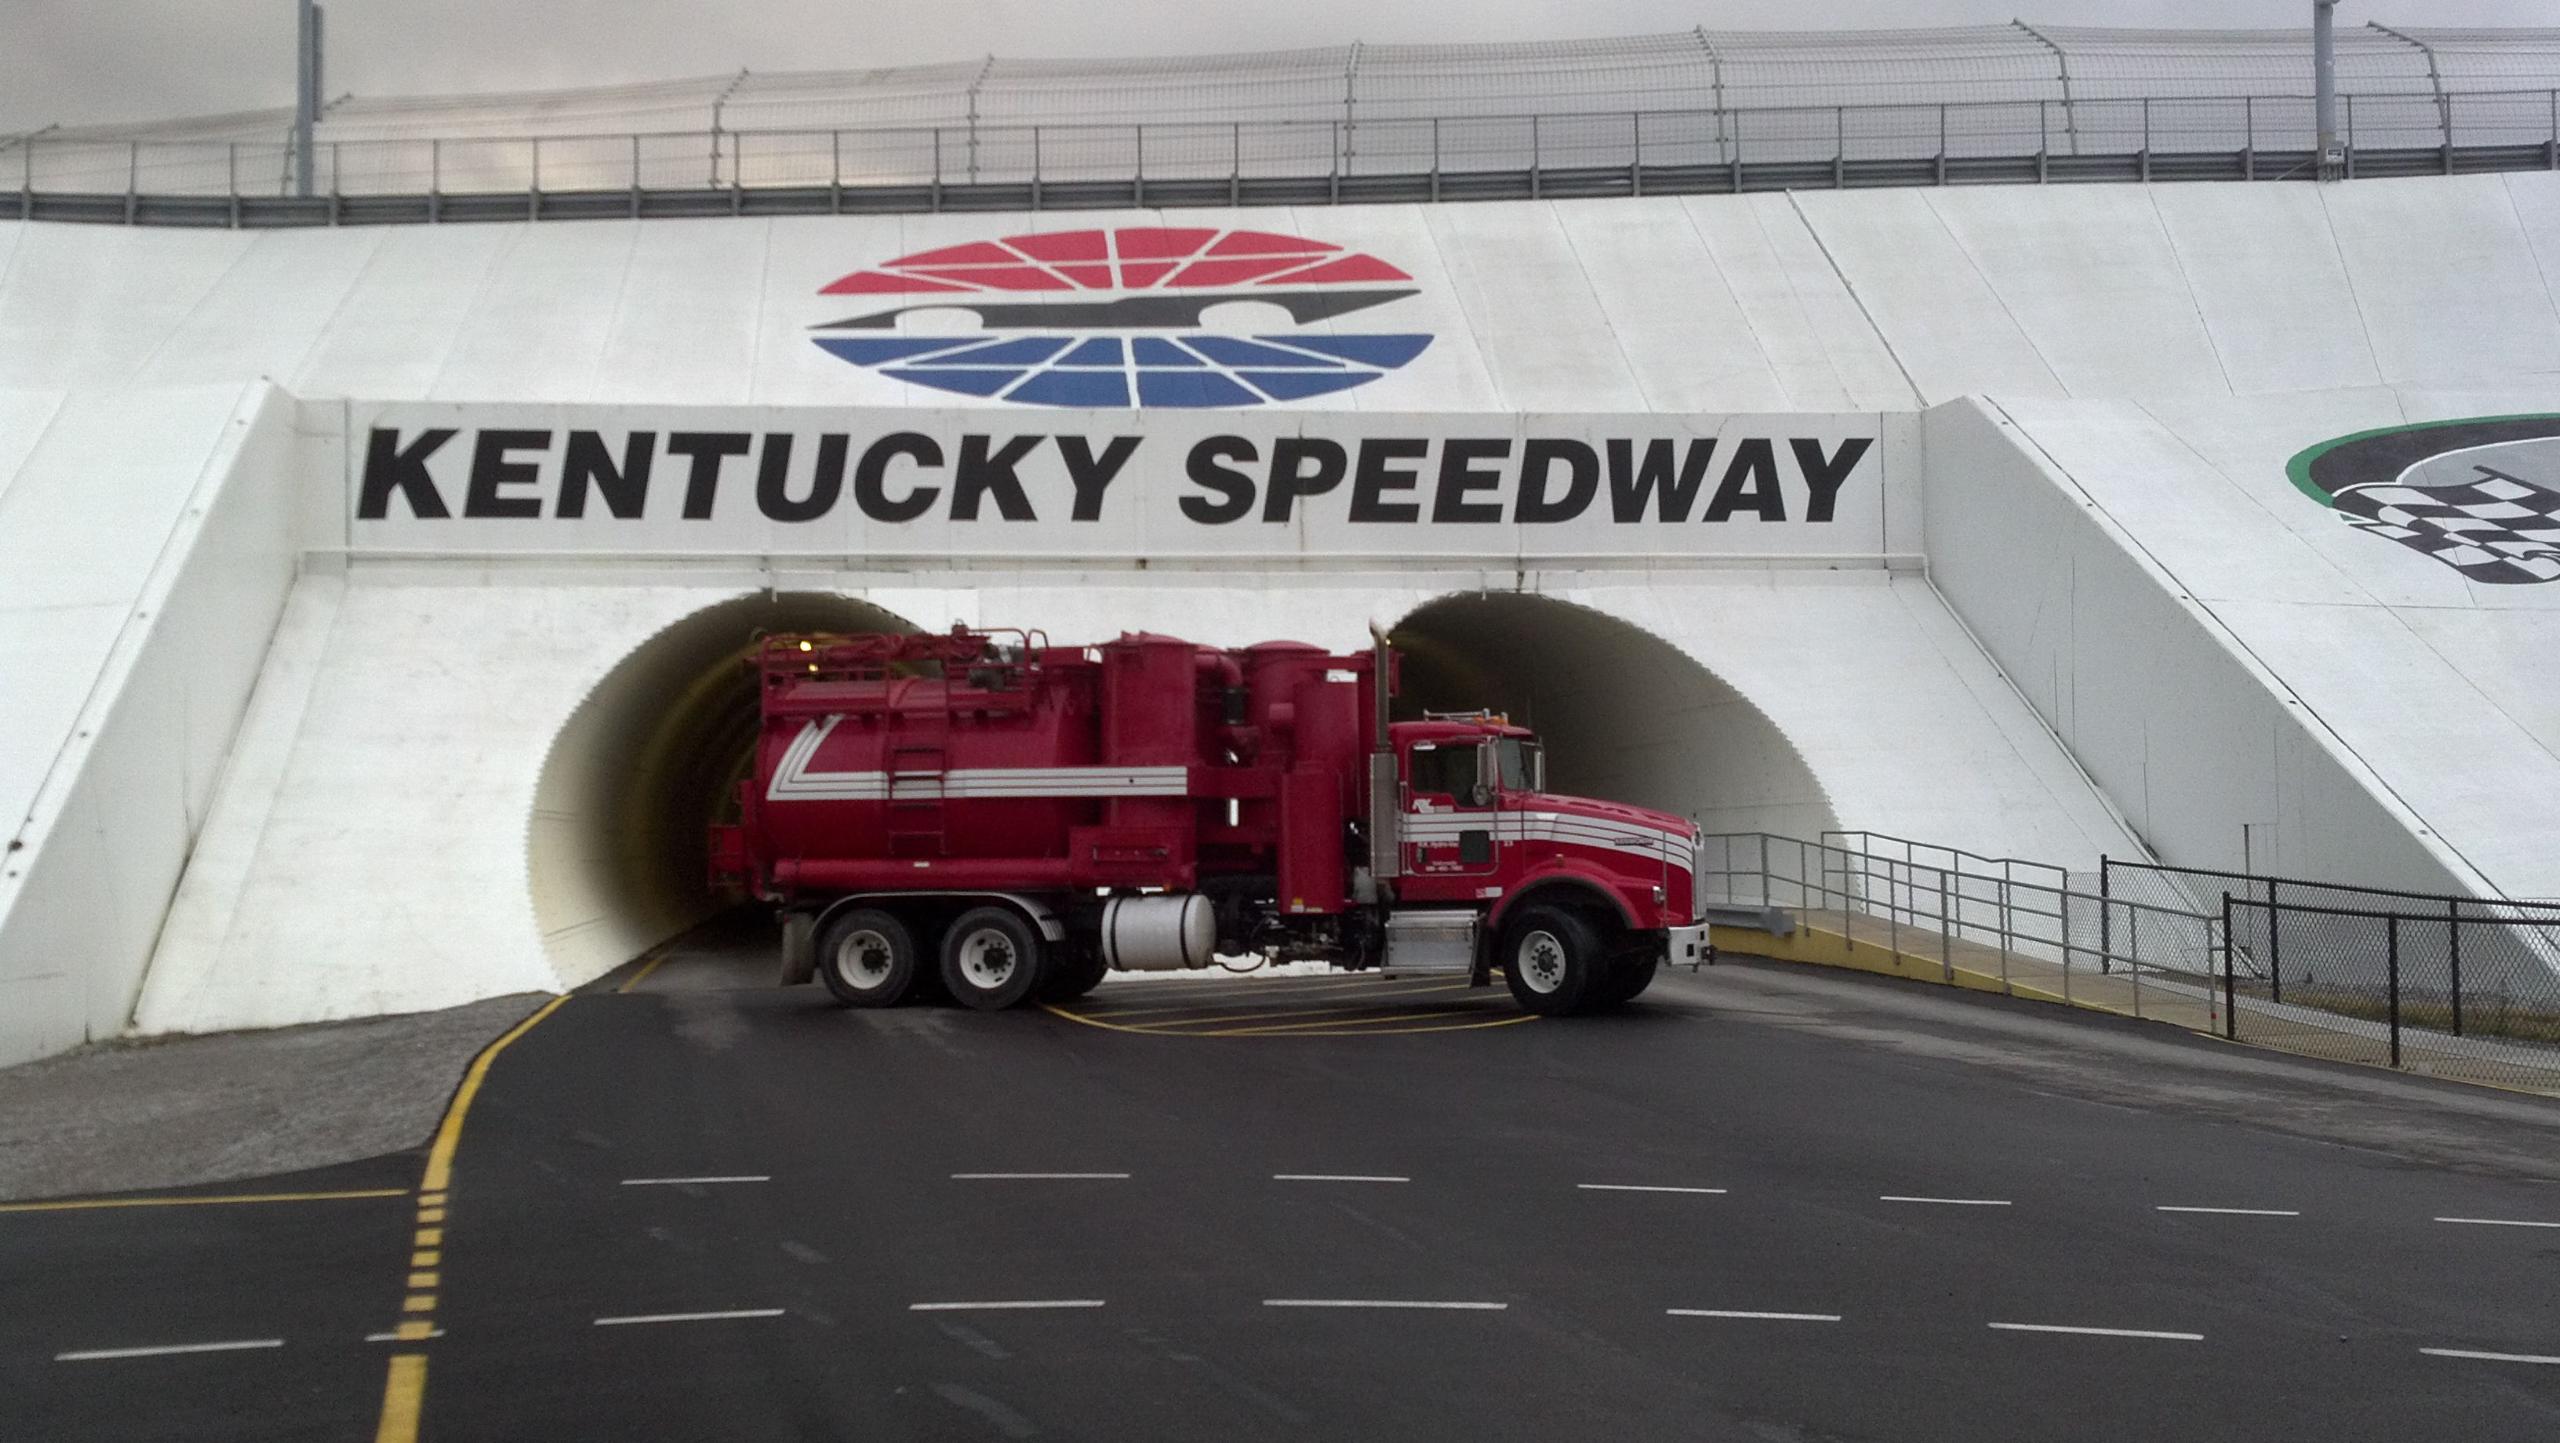 Kentucky Highway Hydrovac Project